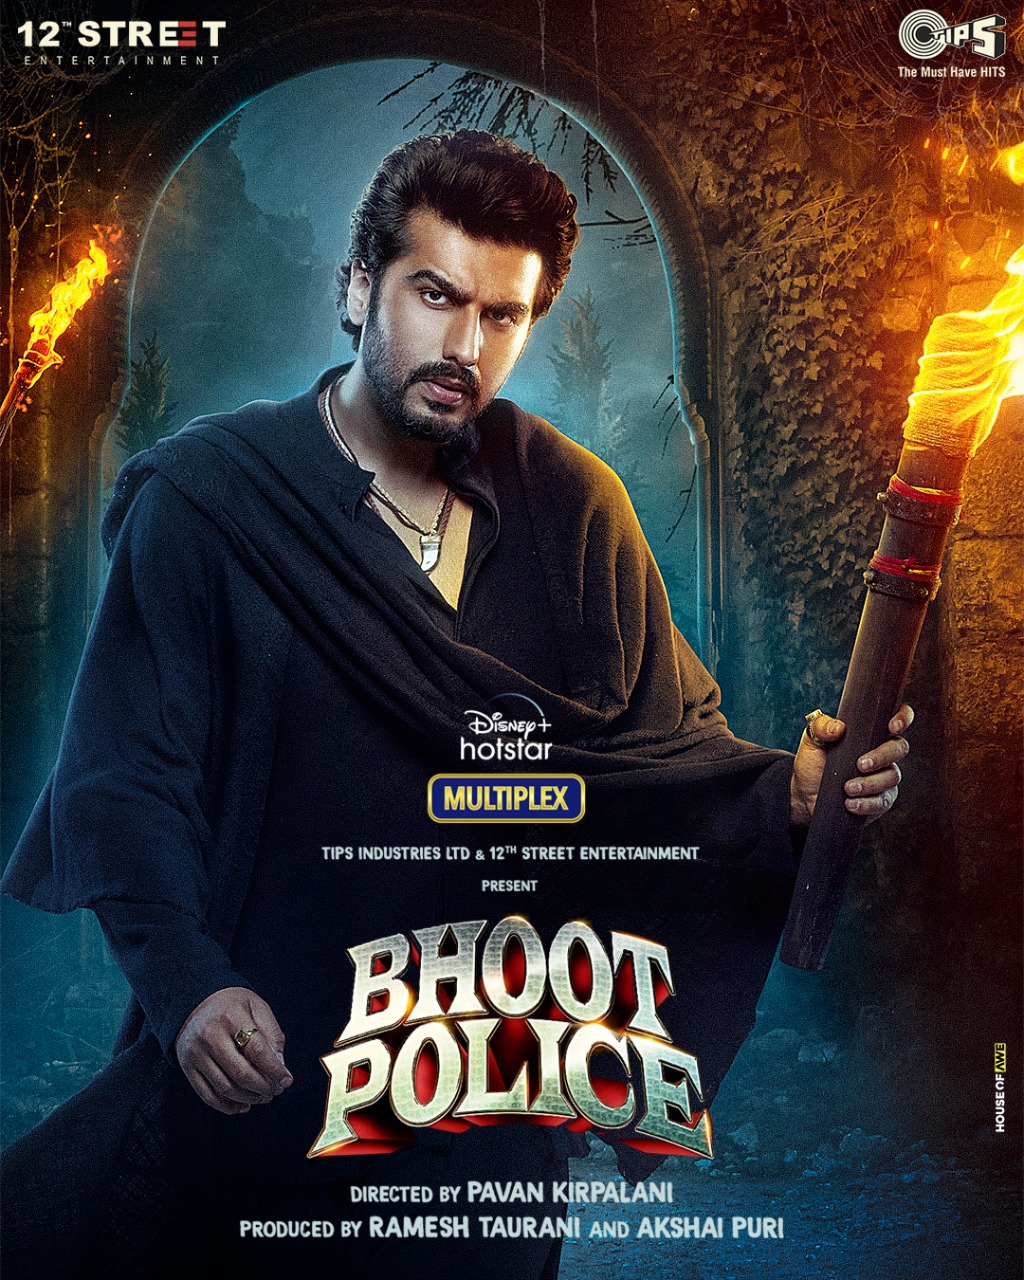 Look who has teamed up with Saif Ali Khan in his next - BHOOT POLICE